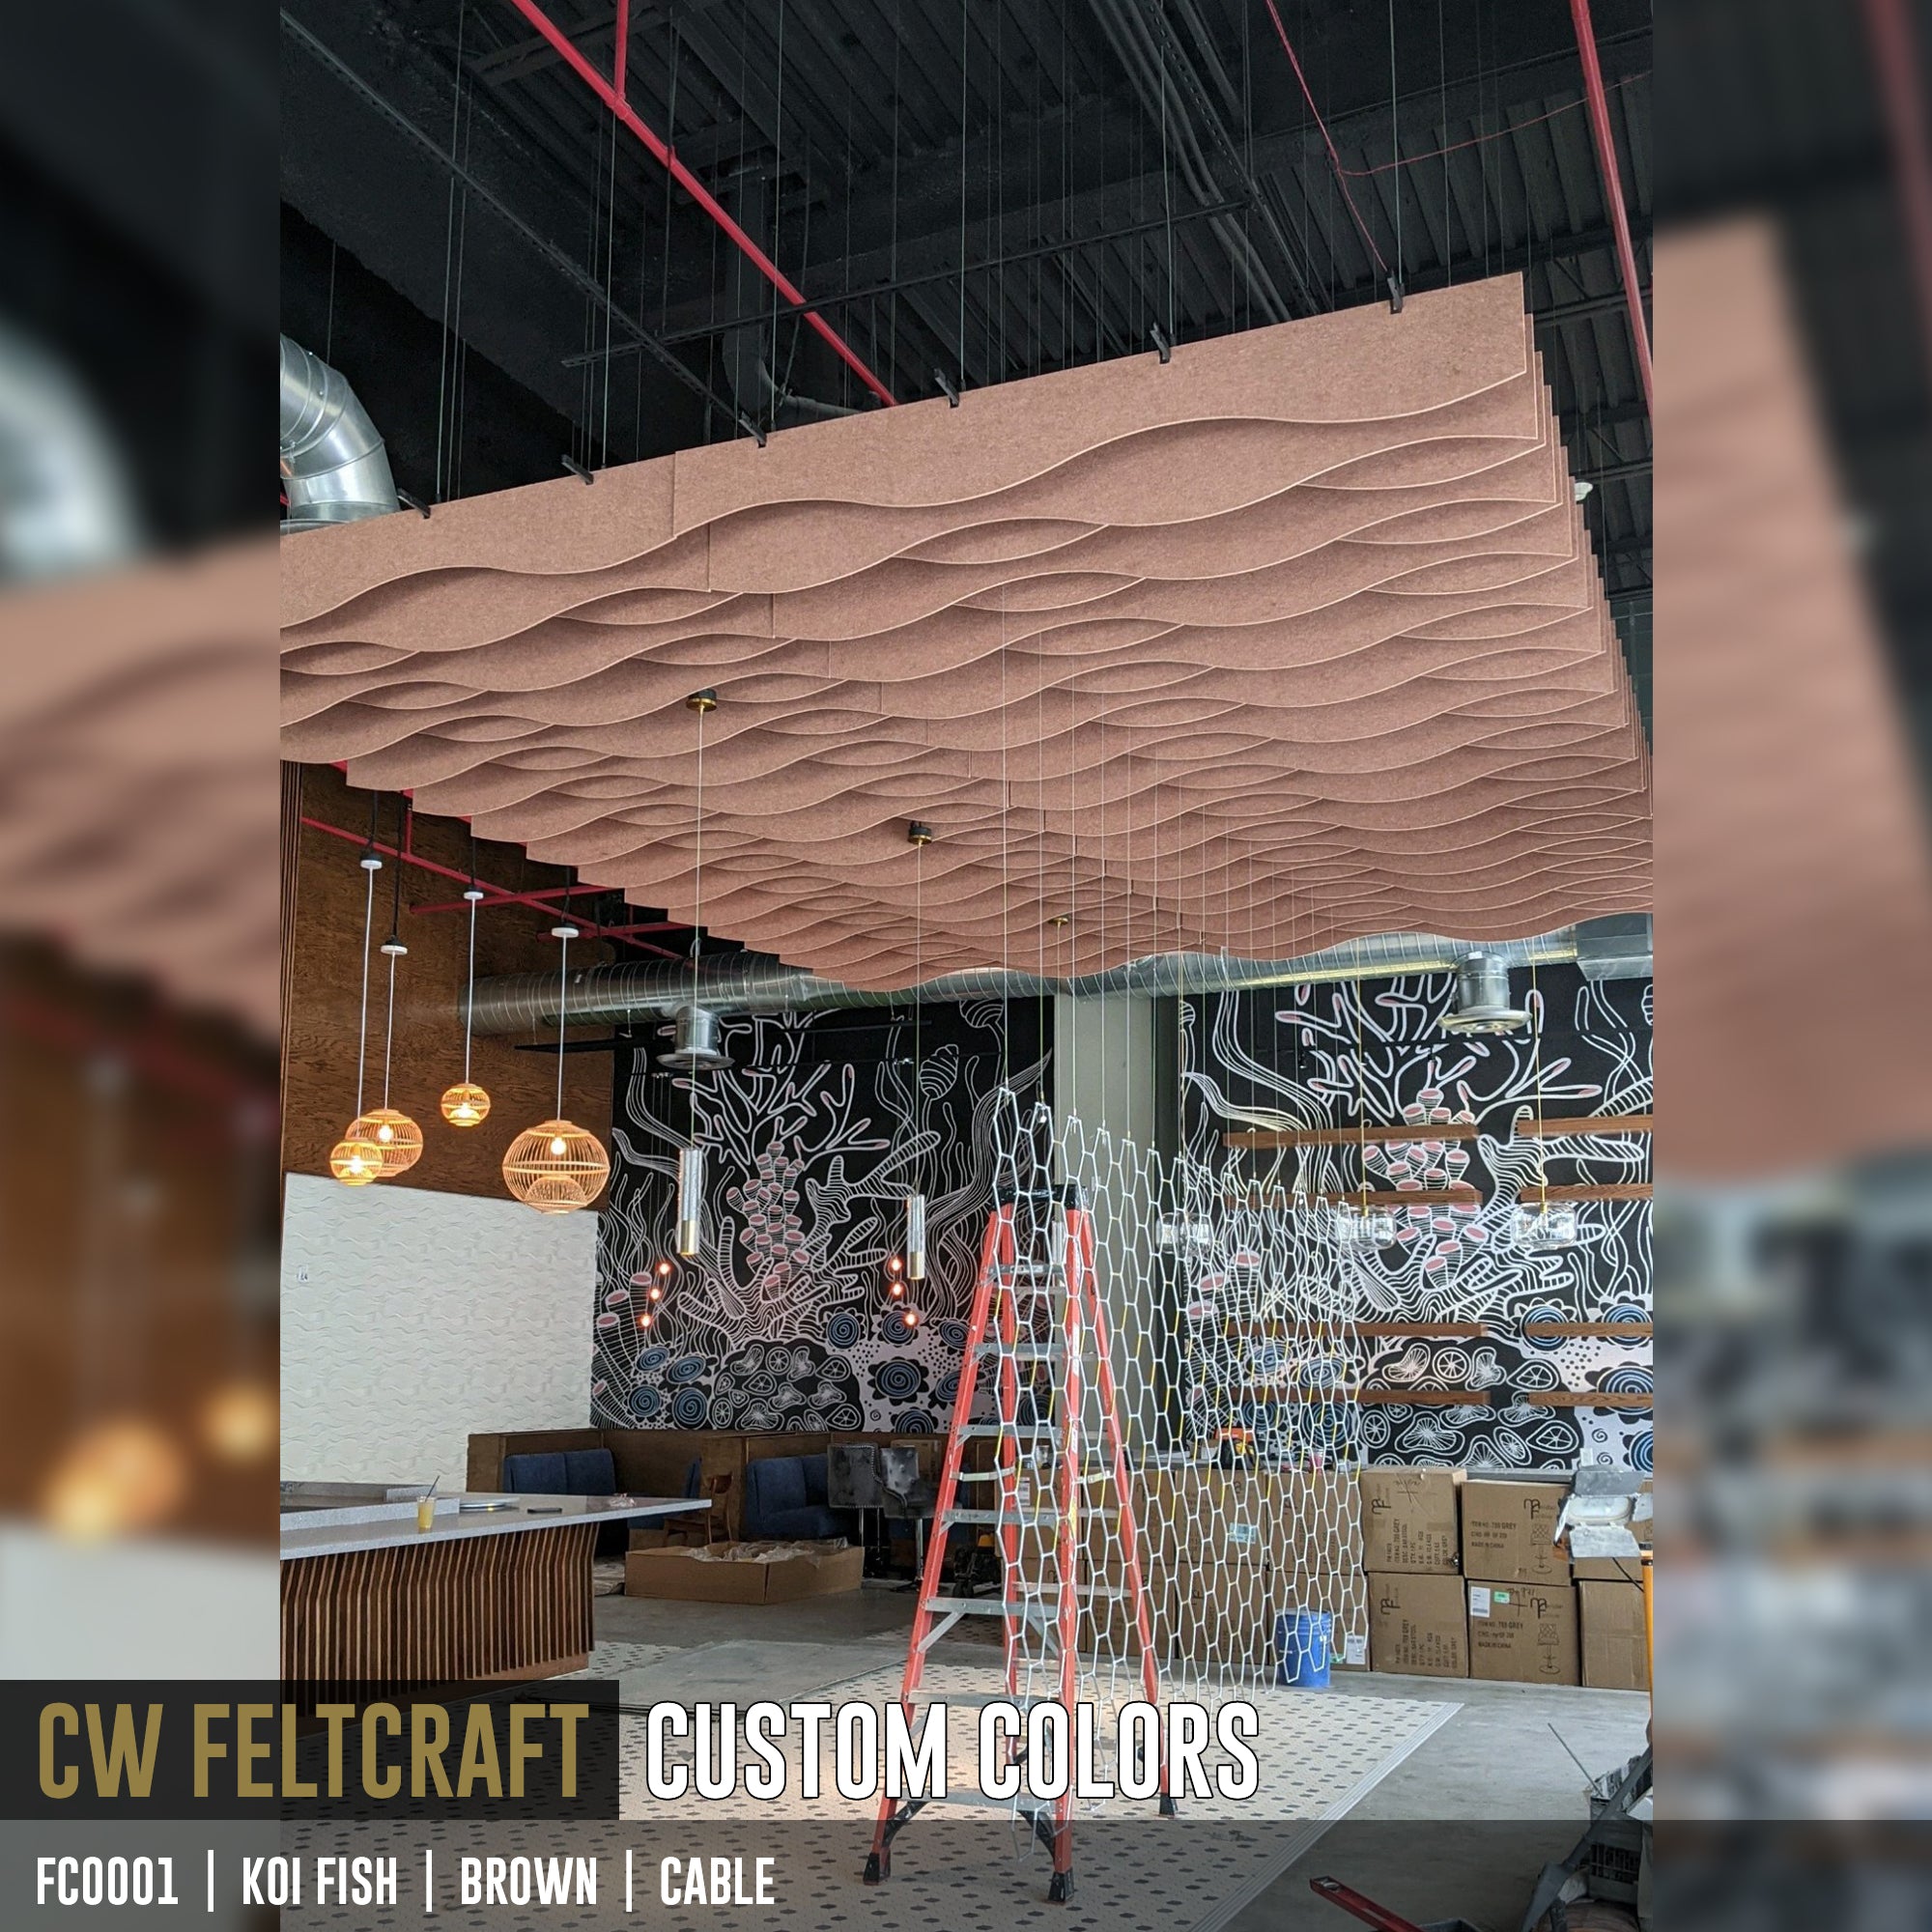 FC0001 | Koi Fish or Waves | Suspended Acoustical Ceiling Baffles System